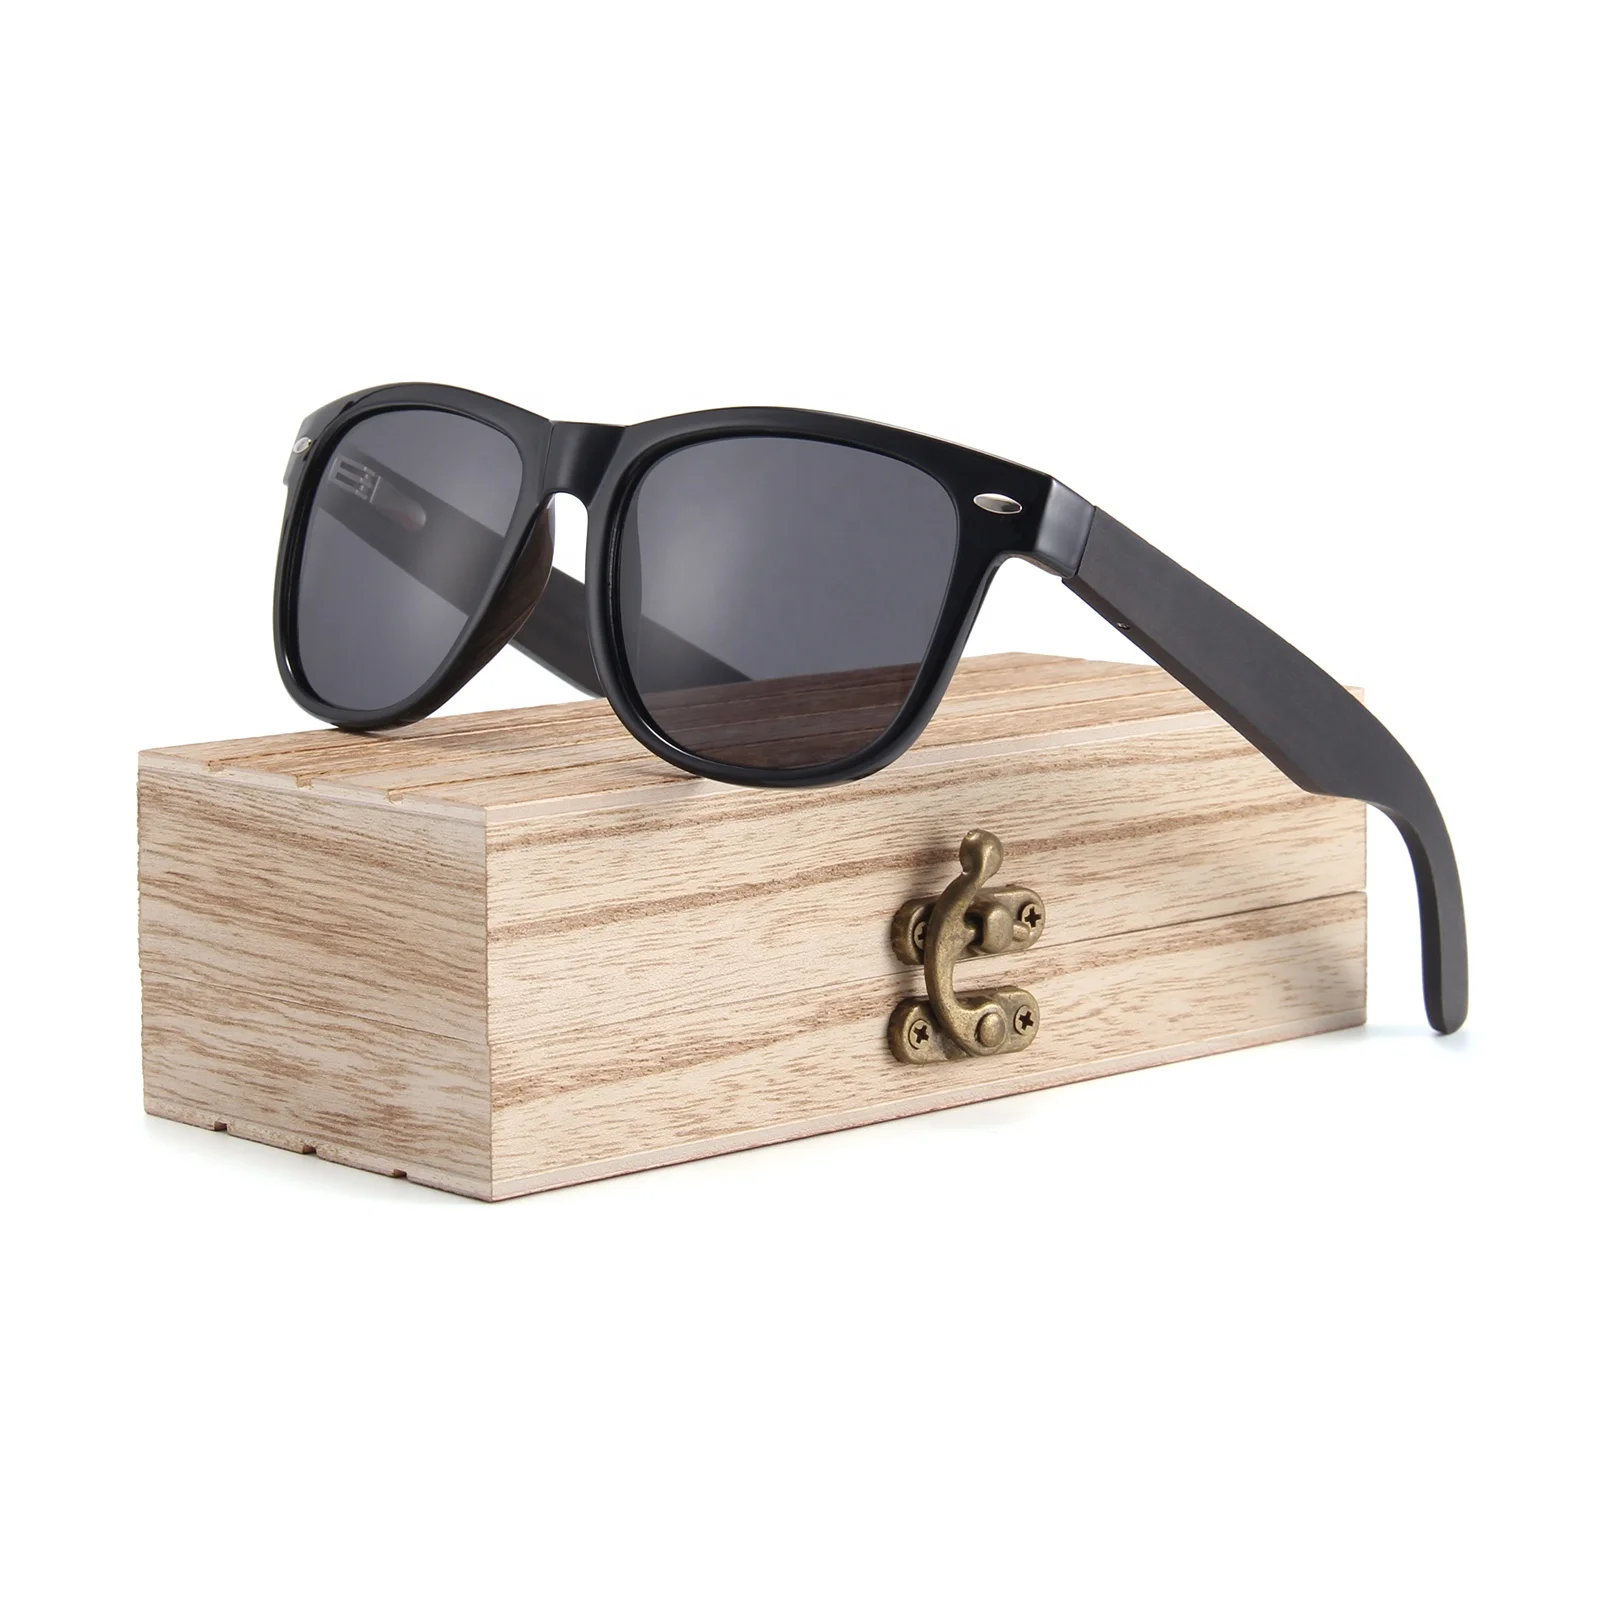 

2019 Will Power Polarized Ebony Wooden Sunglasses Brand Your Own, Mix color